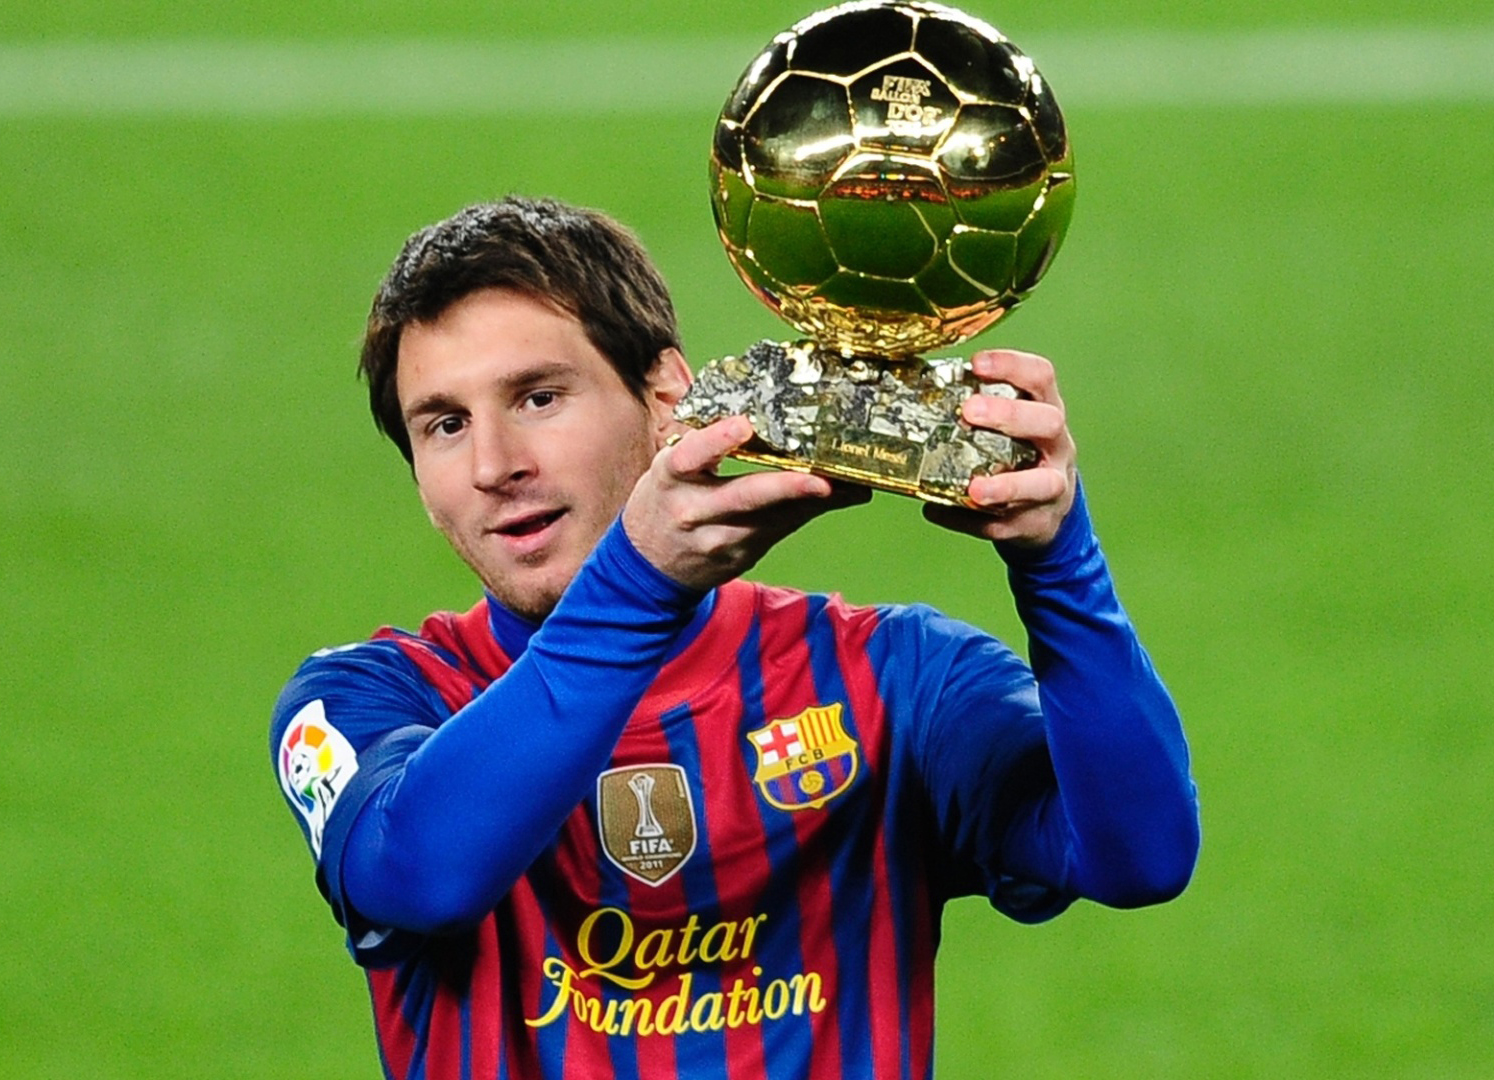 Lionel Messi Football Player Latest Hd Wallpapers